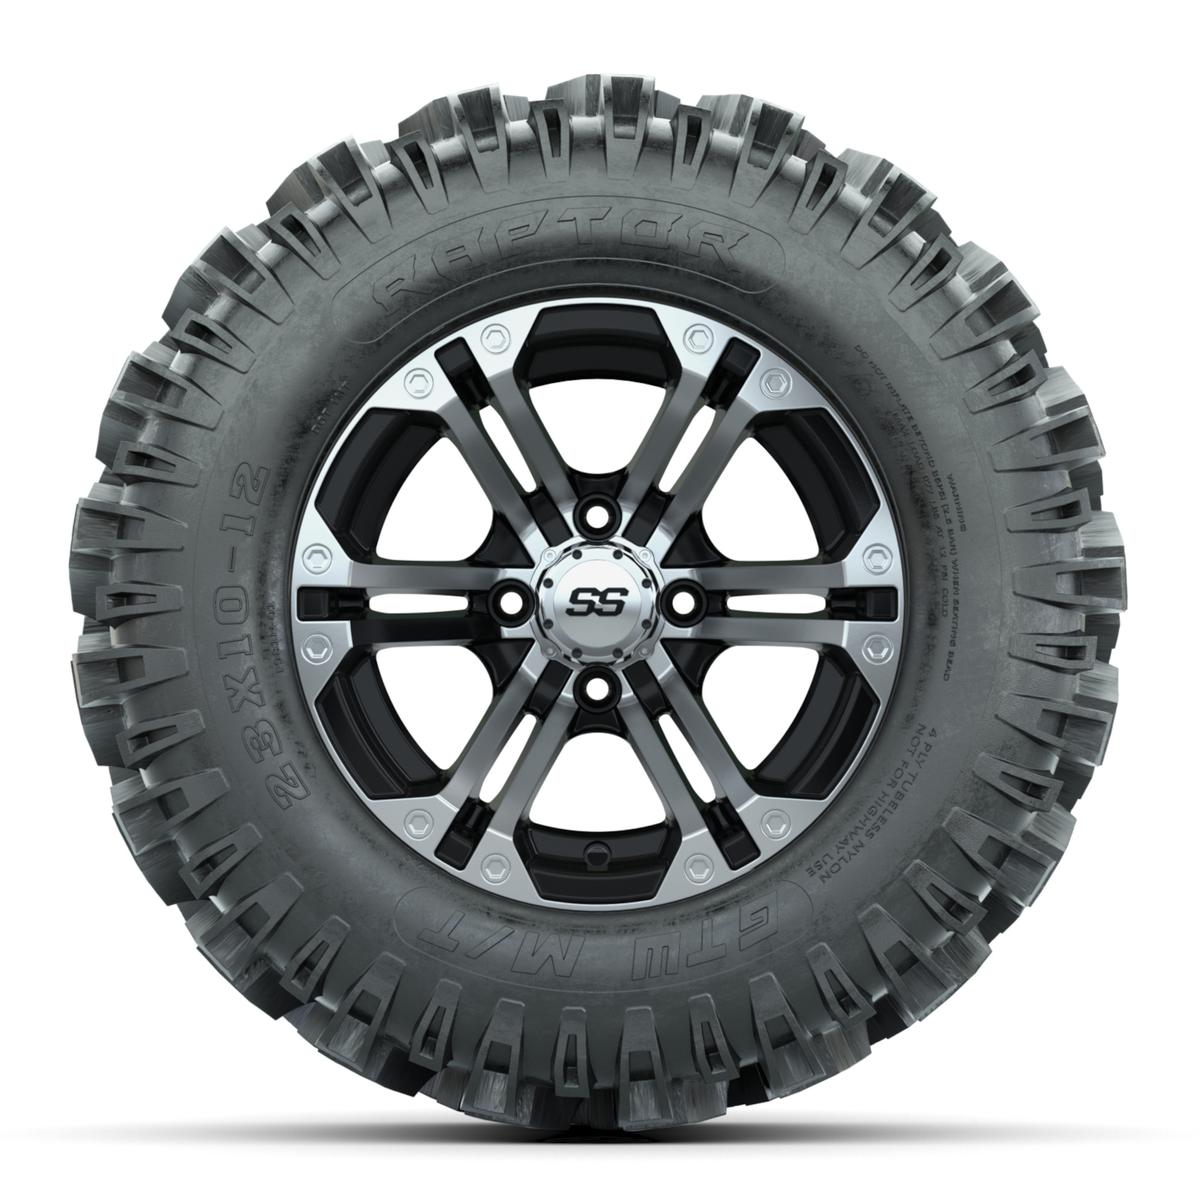 12” GTW Specter Black and Machined Wheels with 23” Raptor Mud Tires – Set of 4